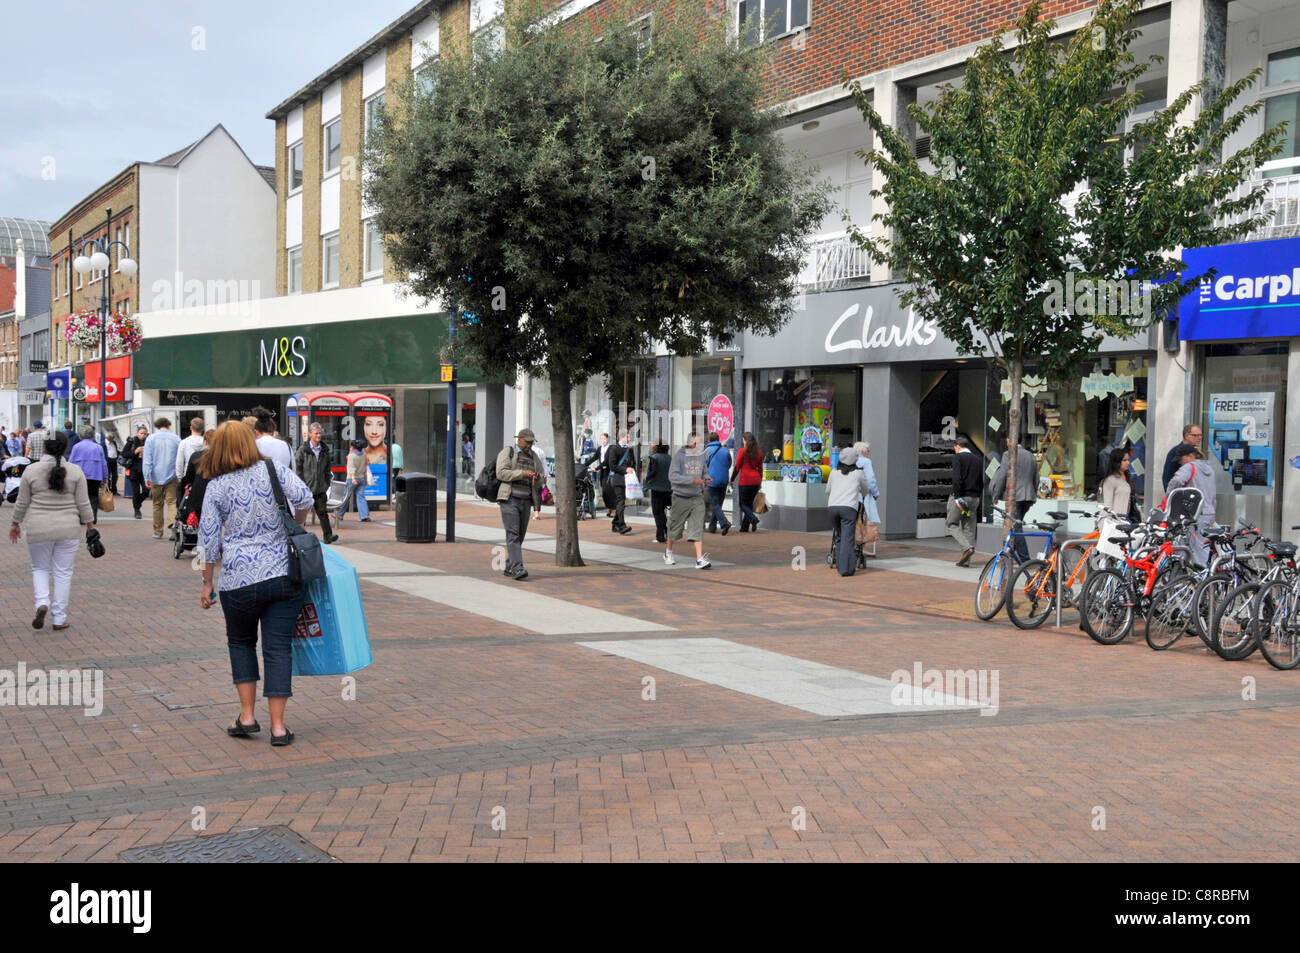 Street scene people and shoppers in pedestrianised Kingston Upon Thames shopping High Street West London England UK Stock Photo